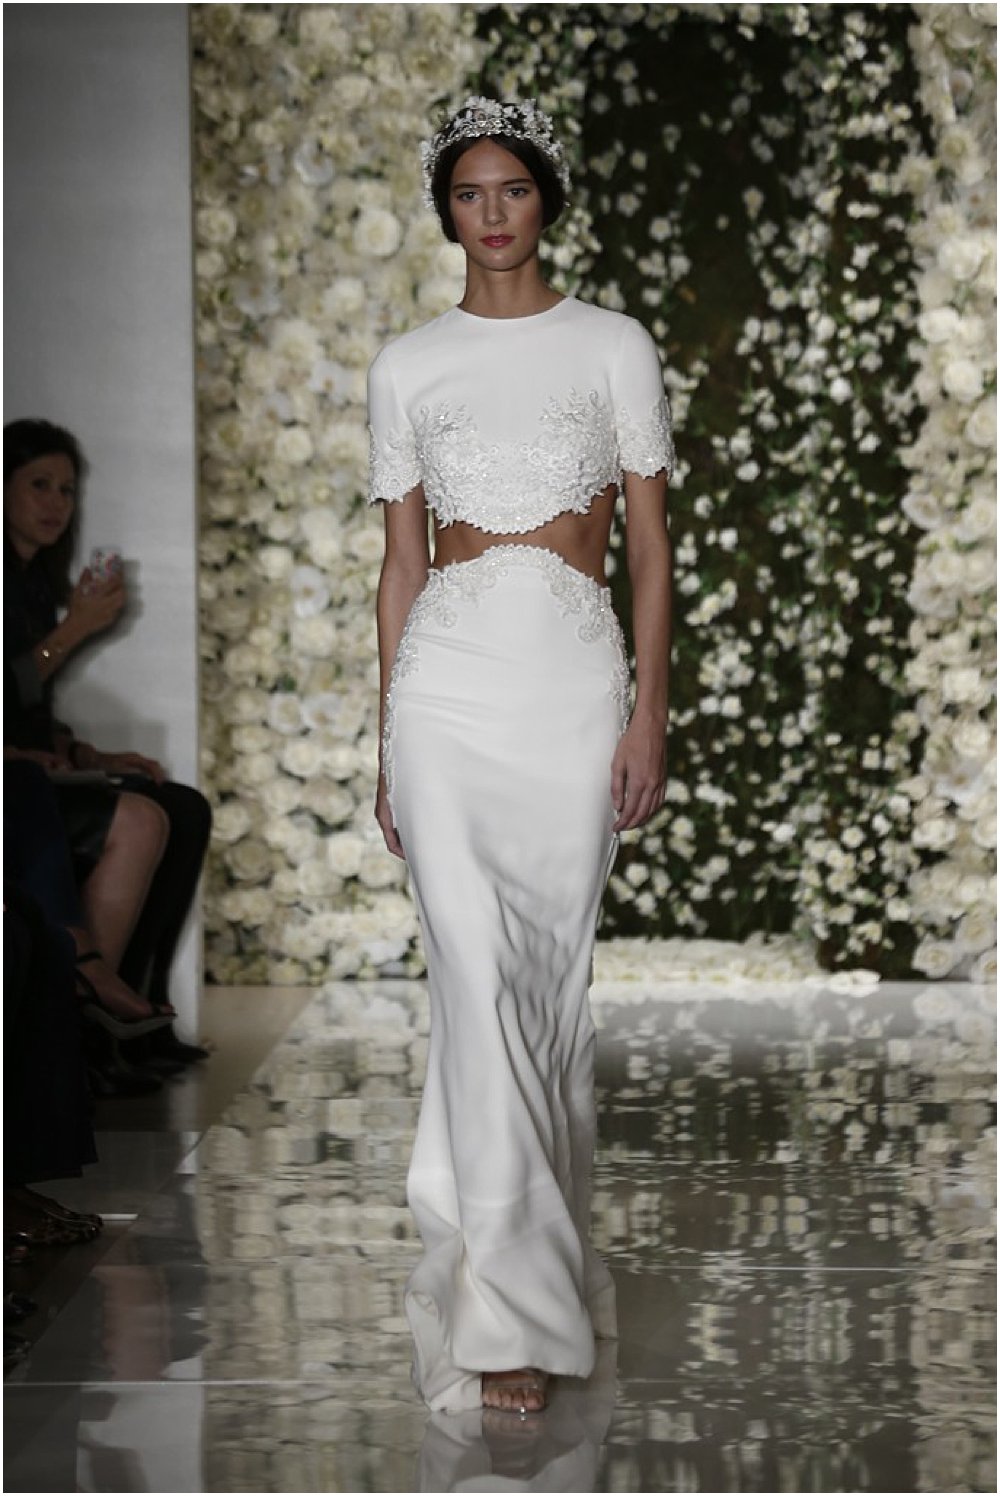 Bridal Trend: Wedding Separates Part Two